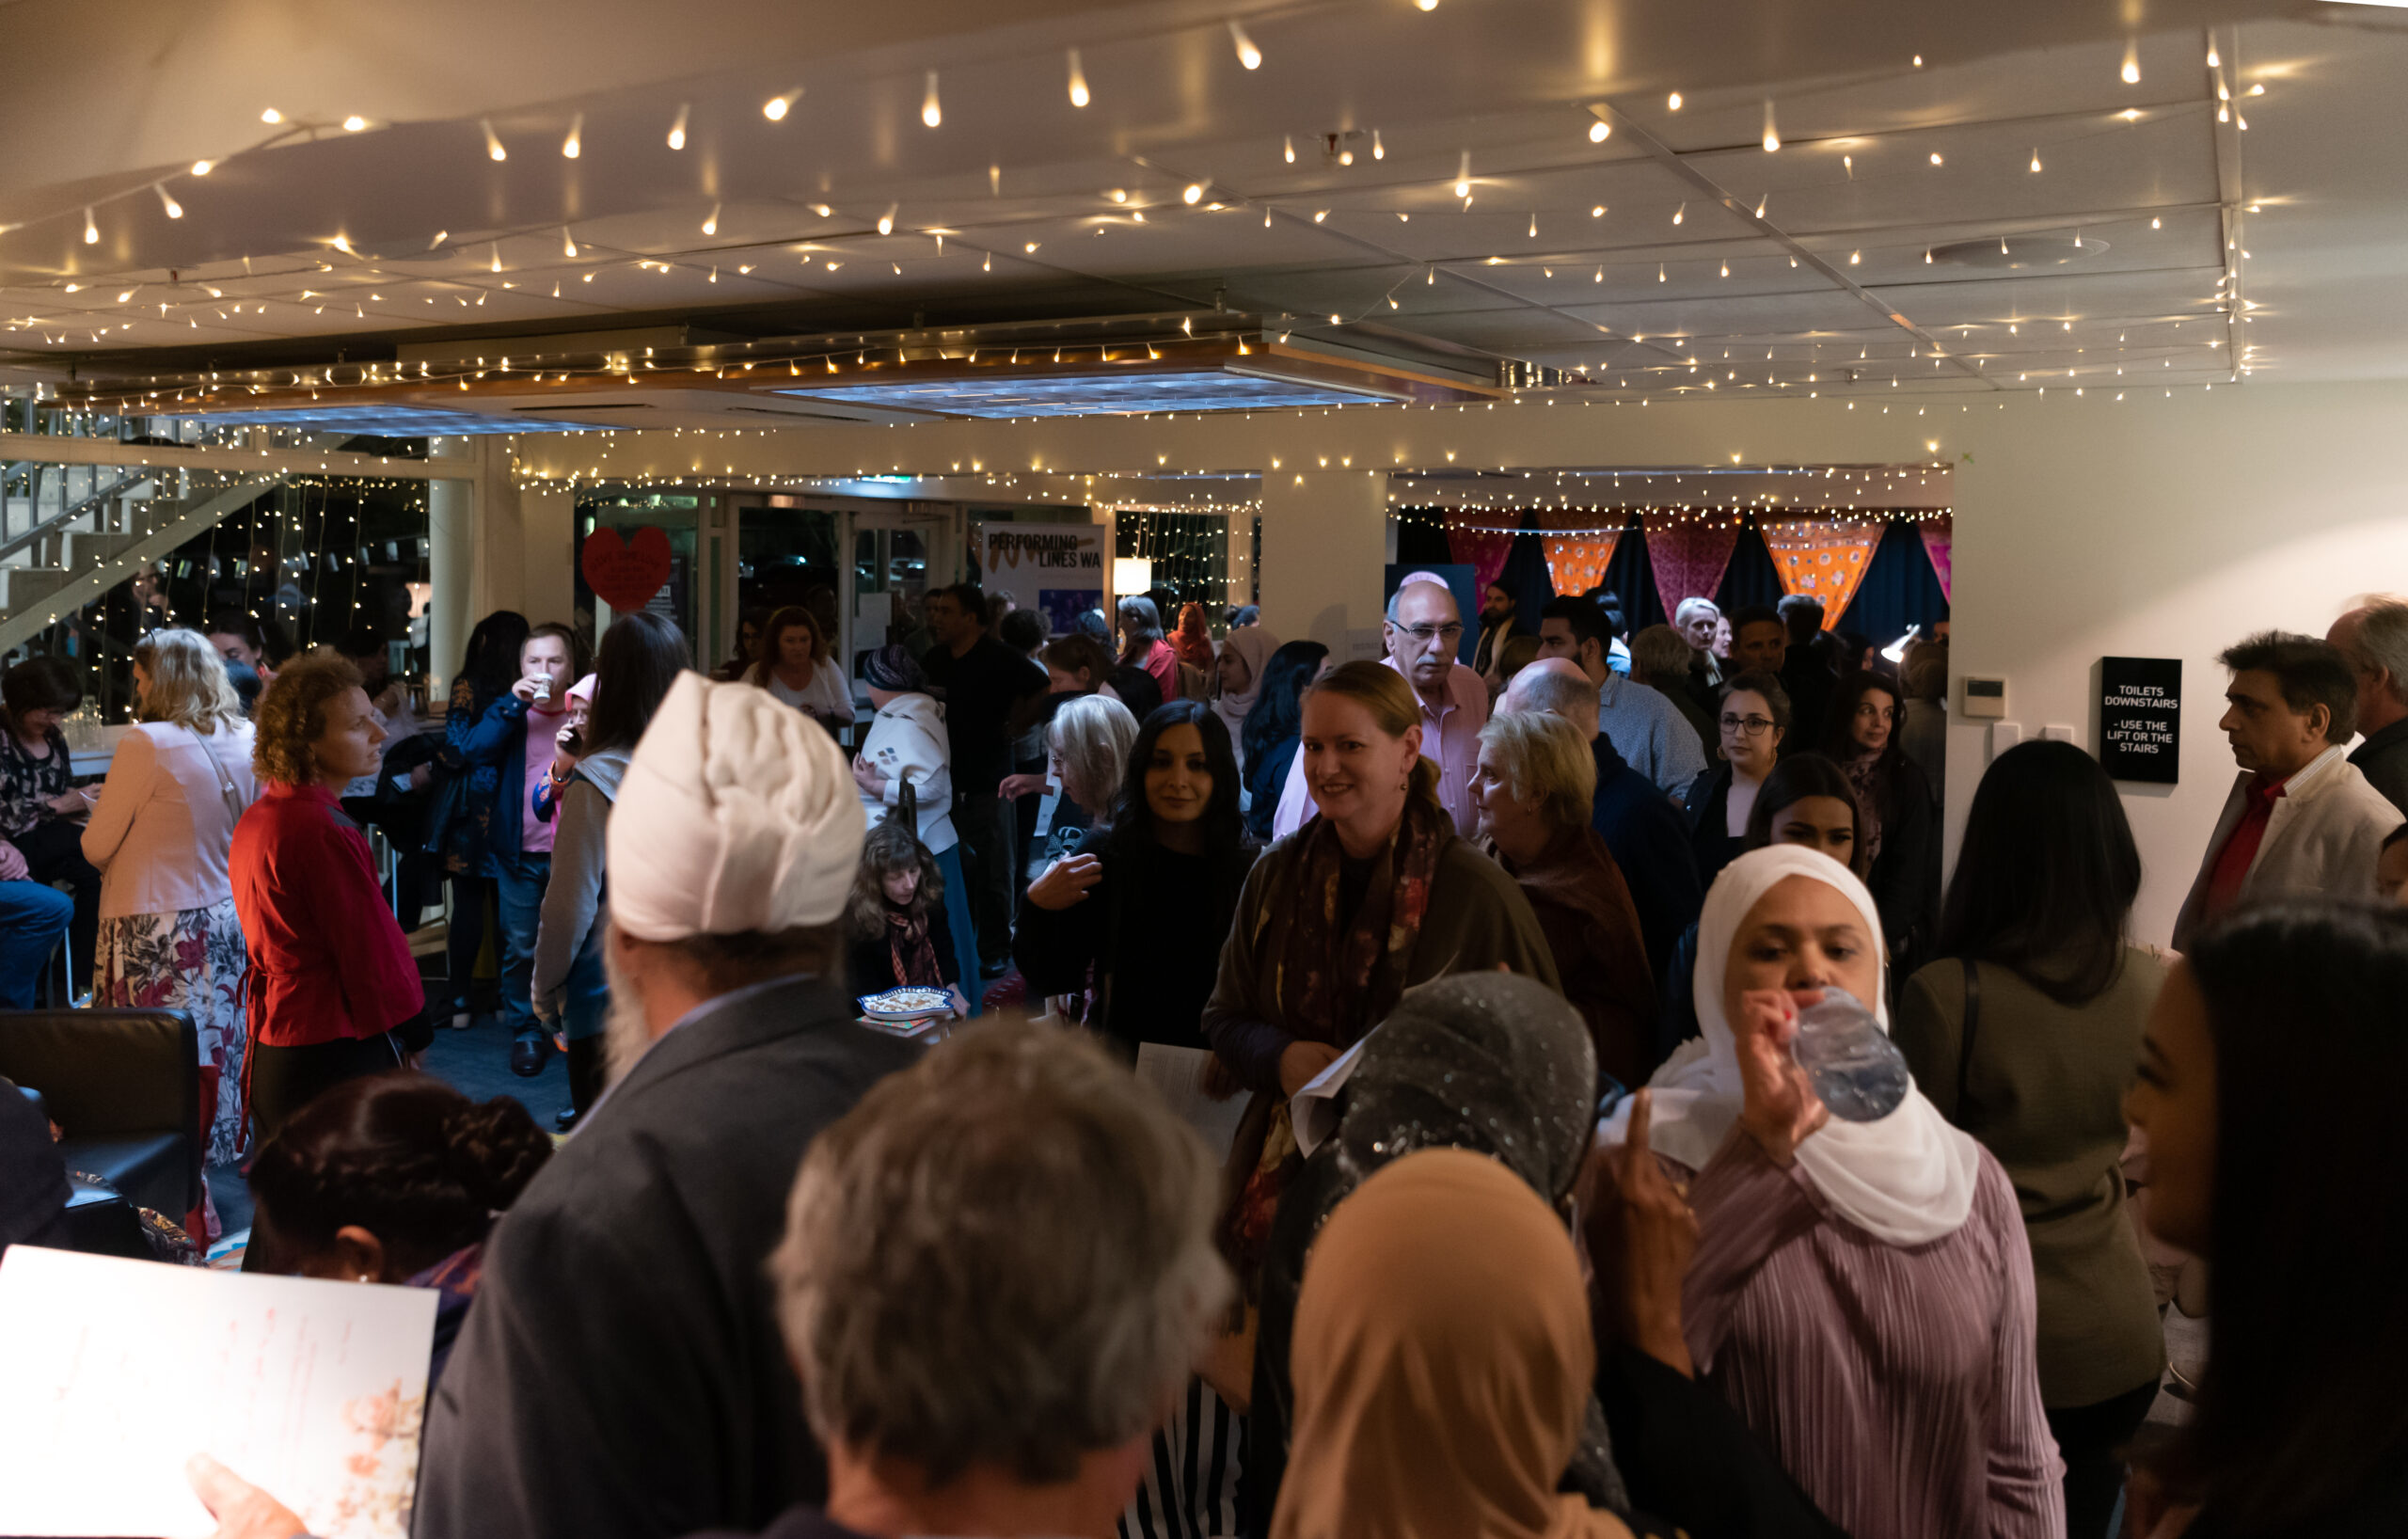 A shot of the audience at the Layla Majnun opening night, there is homey lighting around, casting dappled shadows onto the ceiling, the atmosphere is warm and cosy and the crowd is diverse with some members of the crowd wearing turbans and hijabs